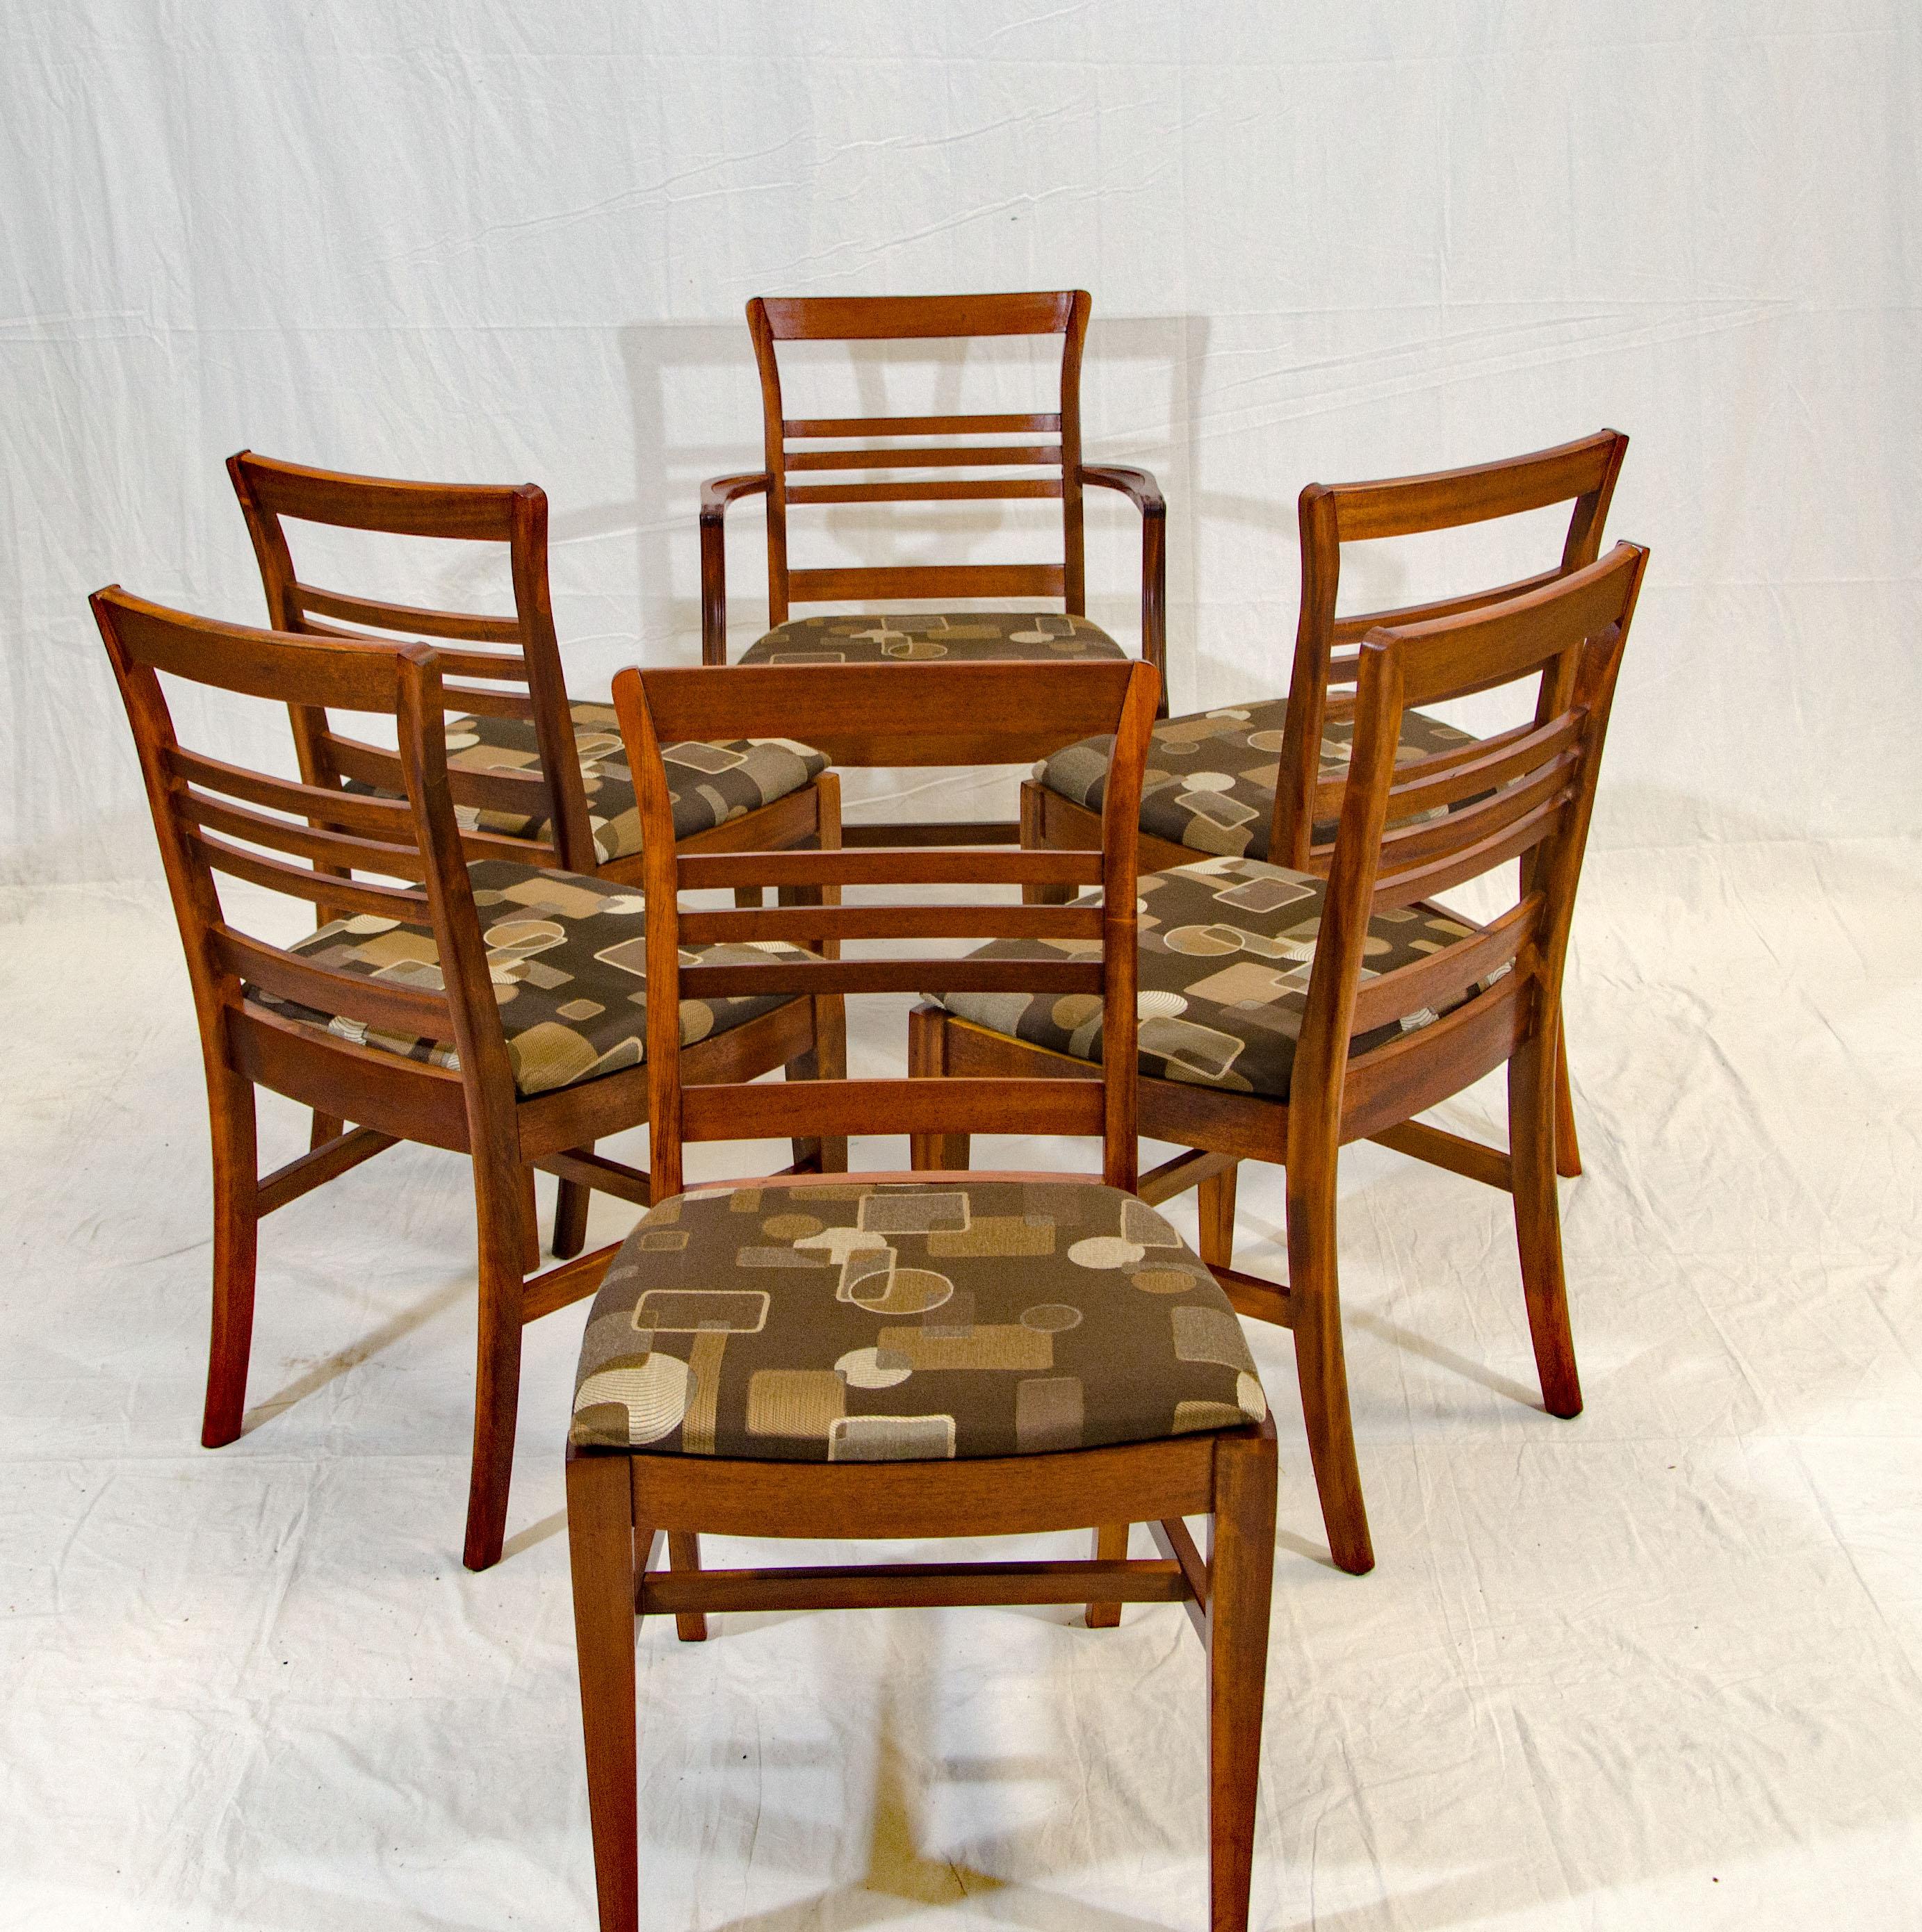 Nice set of six dining chairs that can pair with many styles of dining tables, including vintage teak of walnut. The mahogany is more of a brown tone and not the Duncan Phyfe red mahogany.
Armchair dimensions: 35 1/2